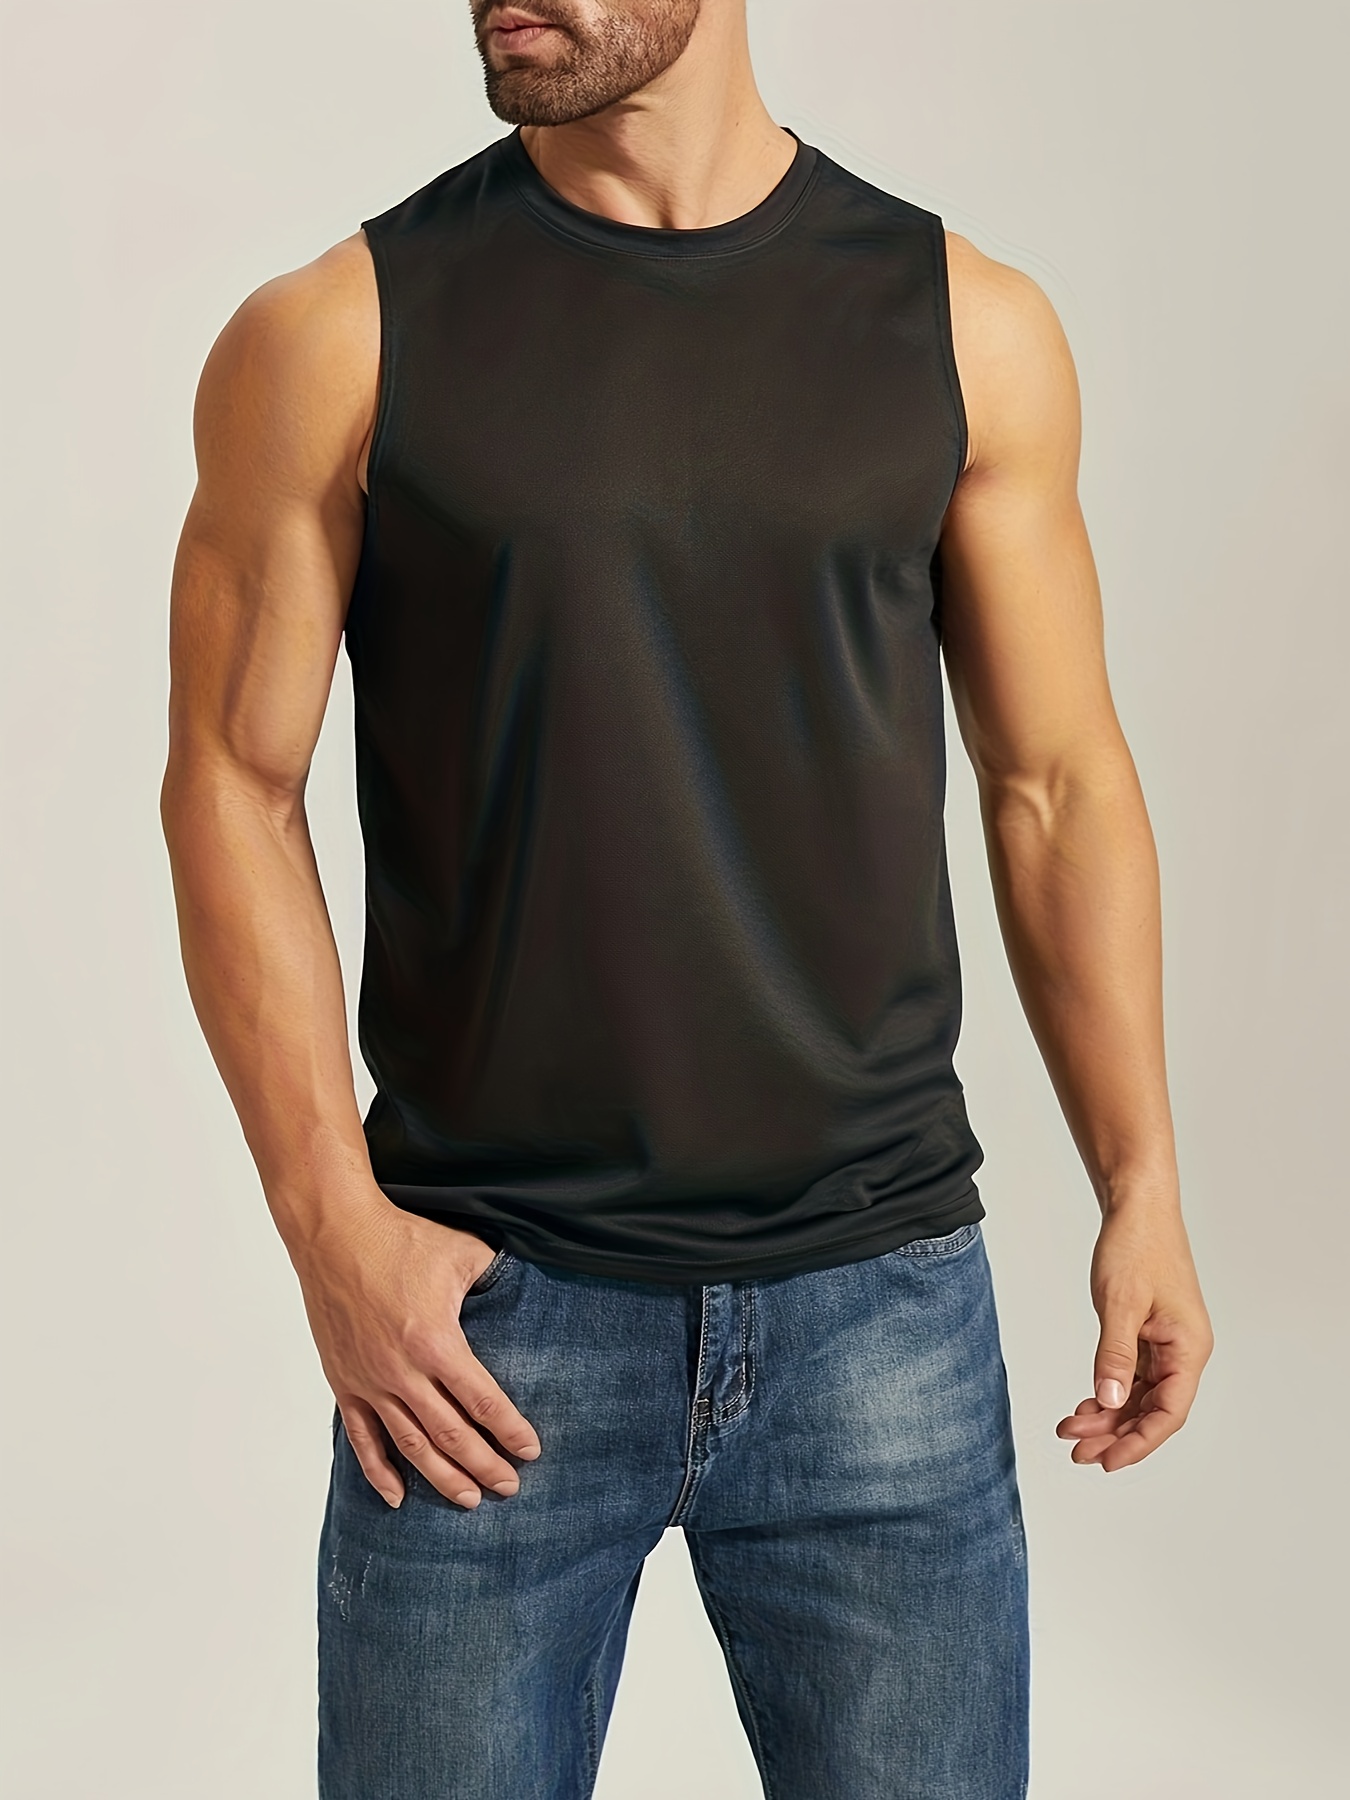 Mens Trend Solid Color Cutout Vest T-Shirt Skinny Sleeveless Bottoming Tank  Tops